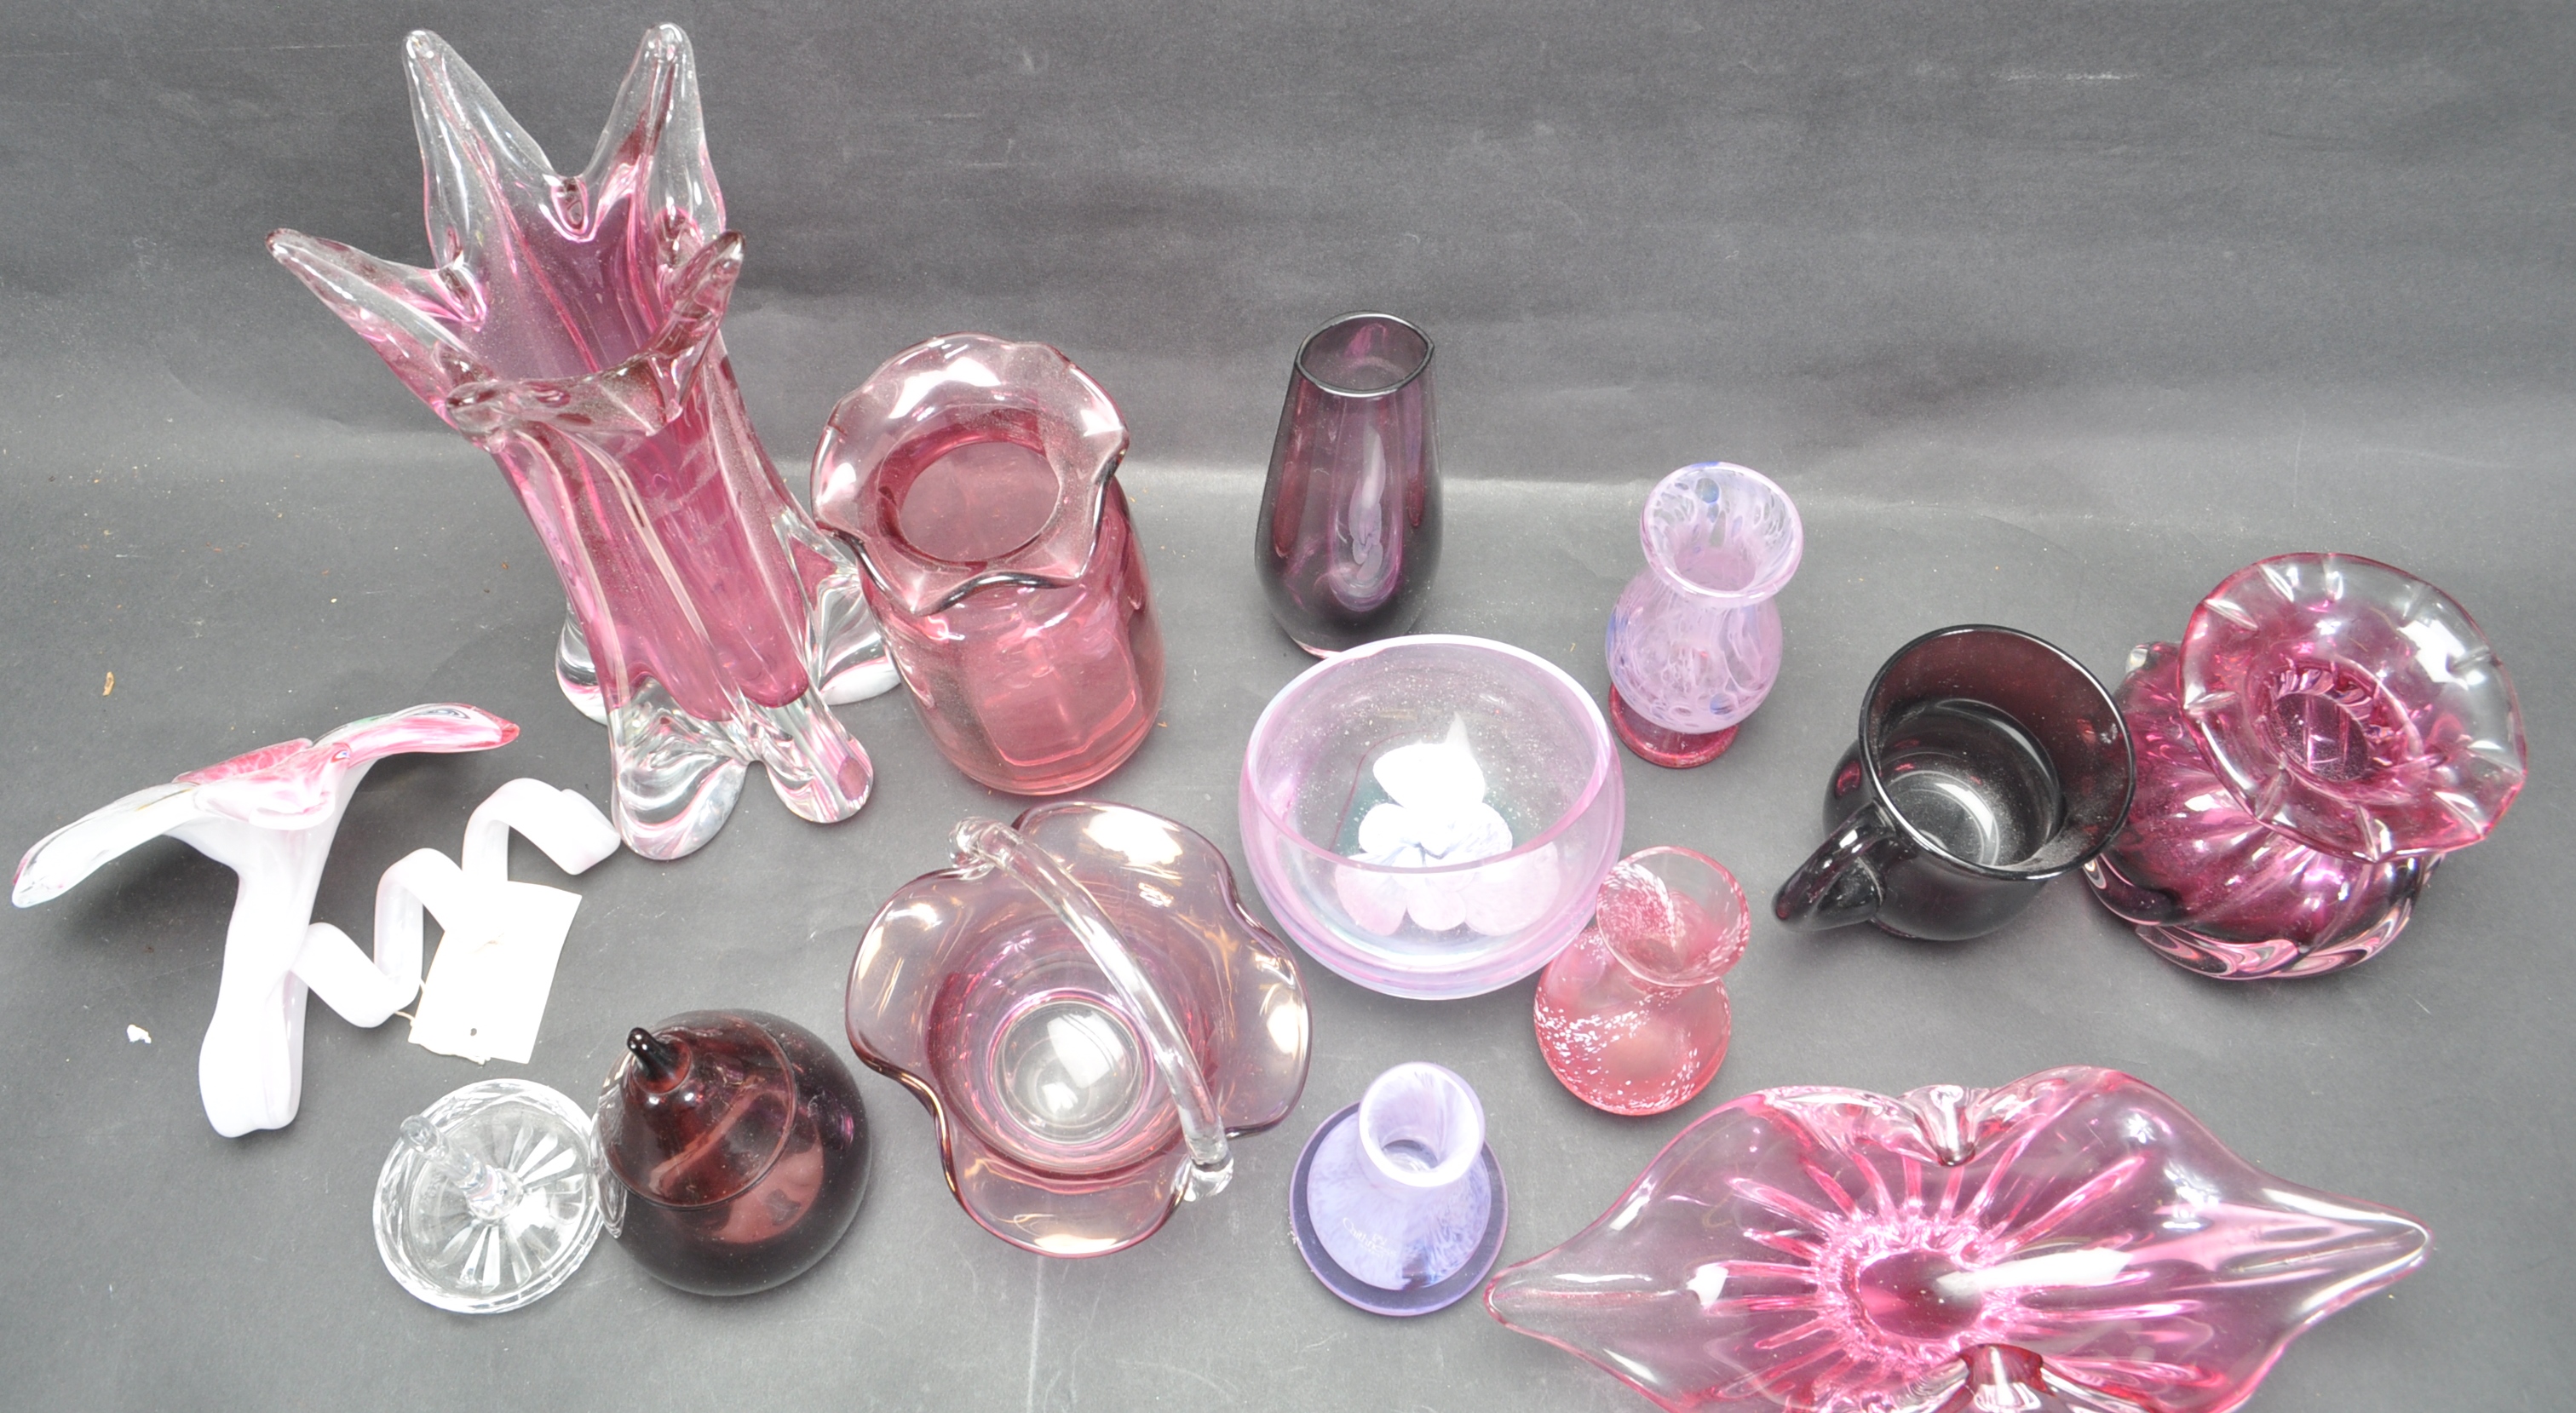 COLLECTION OF 20TH CENTURY GLASS VASES AND ORNAMENTS. - Image 4 of 9